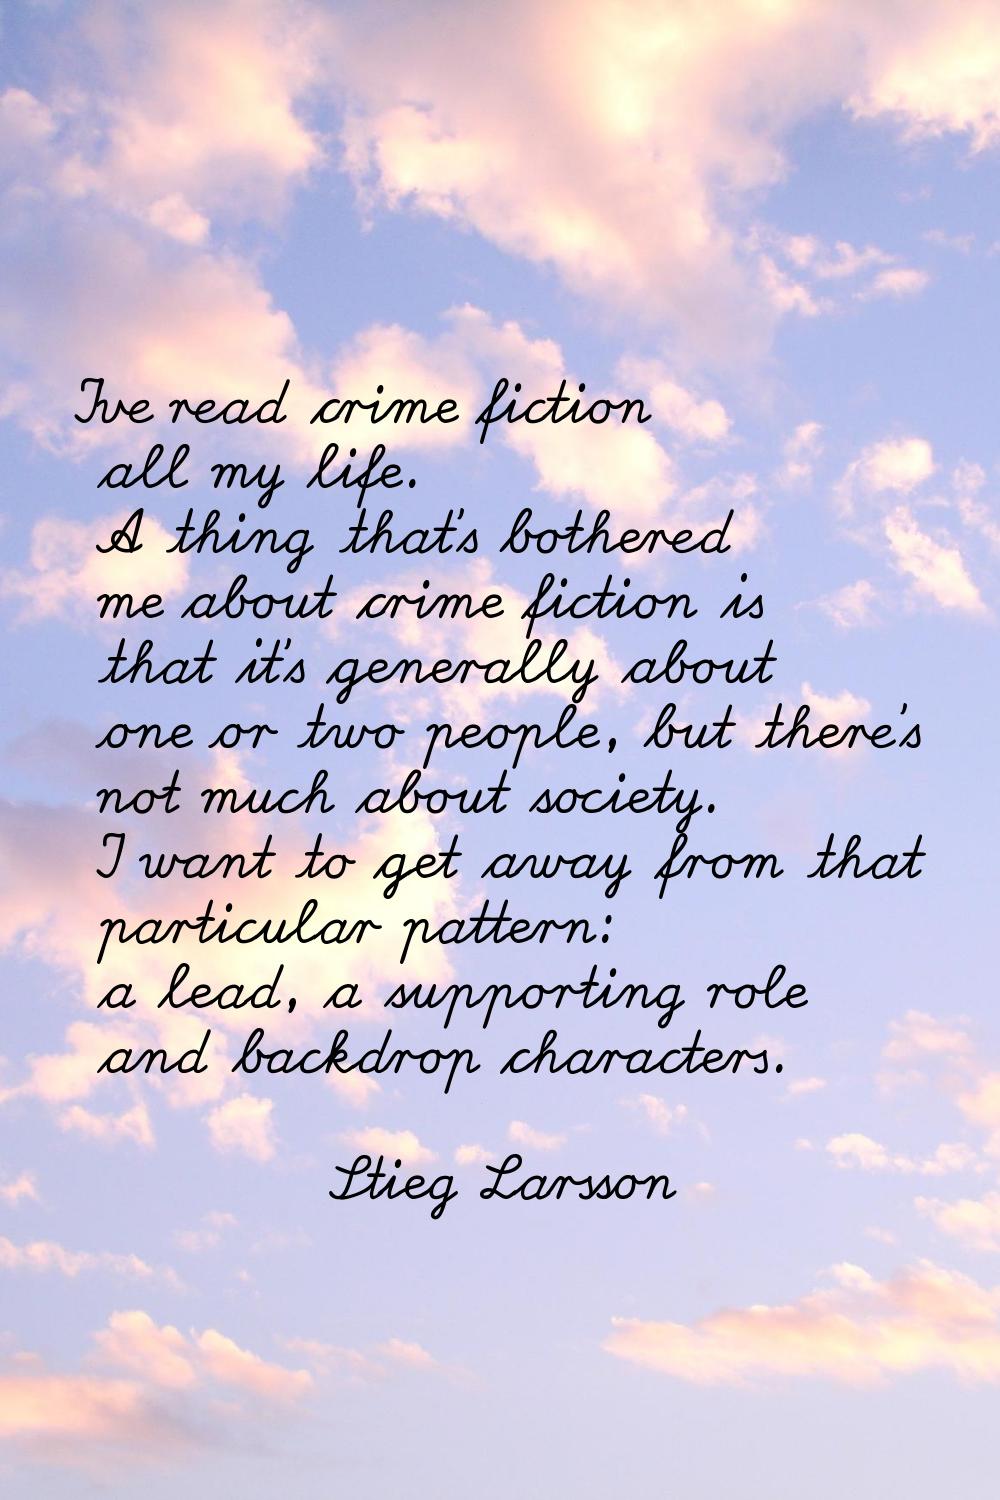 I've read crime fiction all my life. A thing that's bothered me about crime fiction is that it's ge